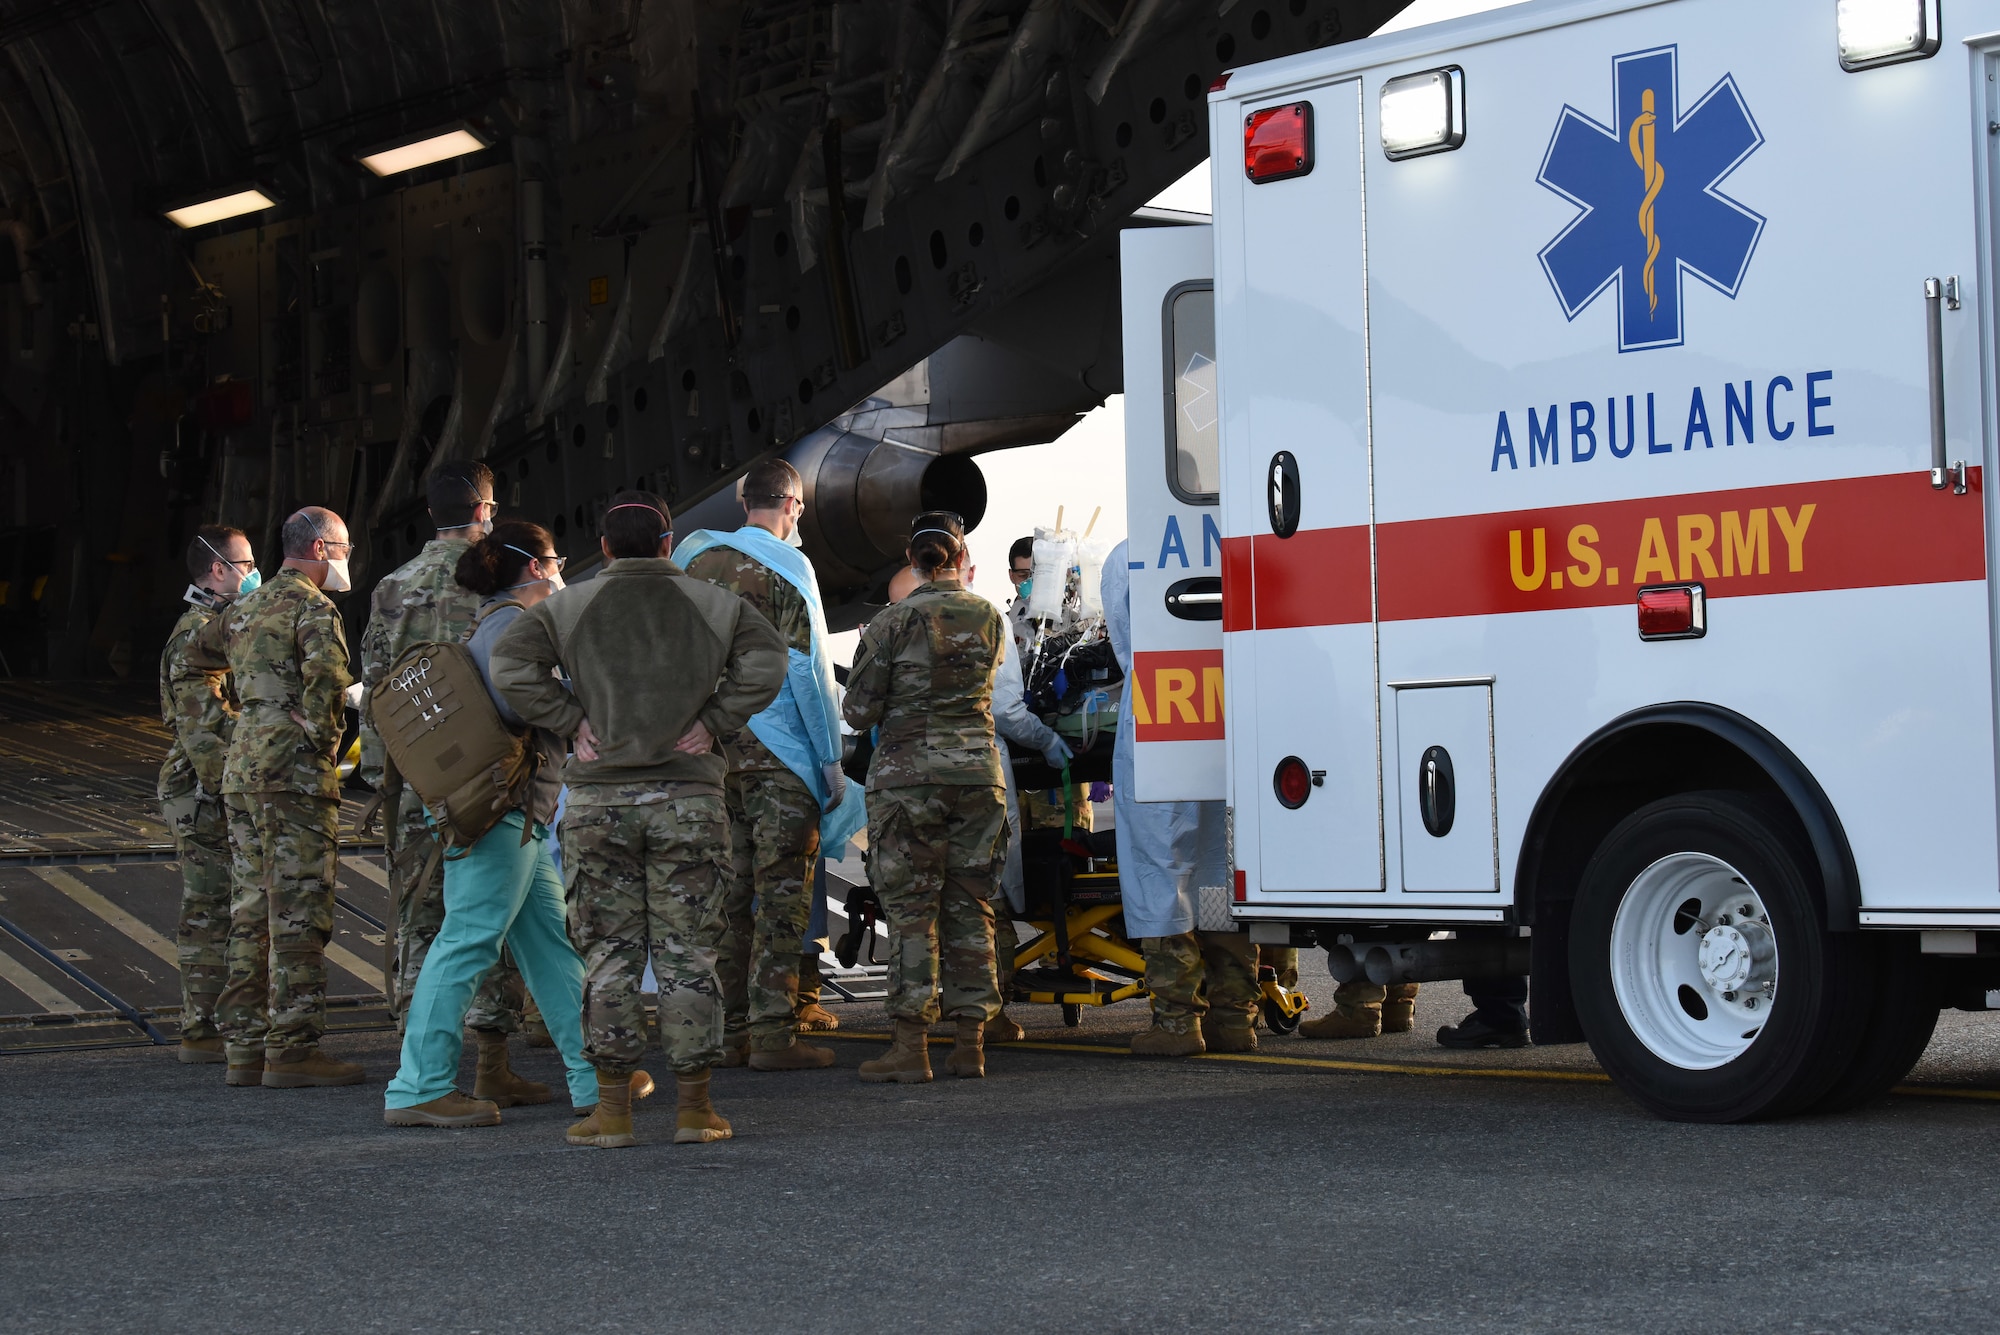 A COVID-19 patient who was being cared for at Madigan Army Medical Center is loaded onto a C-17 Globemaster III by an aeromedical evacuation team from the 775th Expeditionary Aeromedical Evacuation flight from Travis Air Force Base, California, and other medical professionals from Madigan, at Joint Base Lewis-McChord, Washington, March 31, 2021. The patient was in severe respiratory distress and was hooked up to an extracorporeal membrane oxygenation (EMCO) system, which aids the body in breathing. (U.S. Air Force photo by Senior Airman Mikayla Heineck)